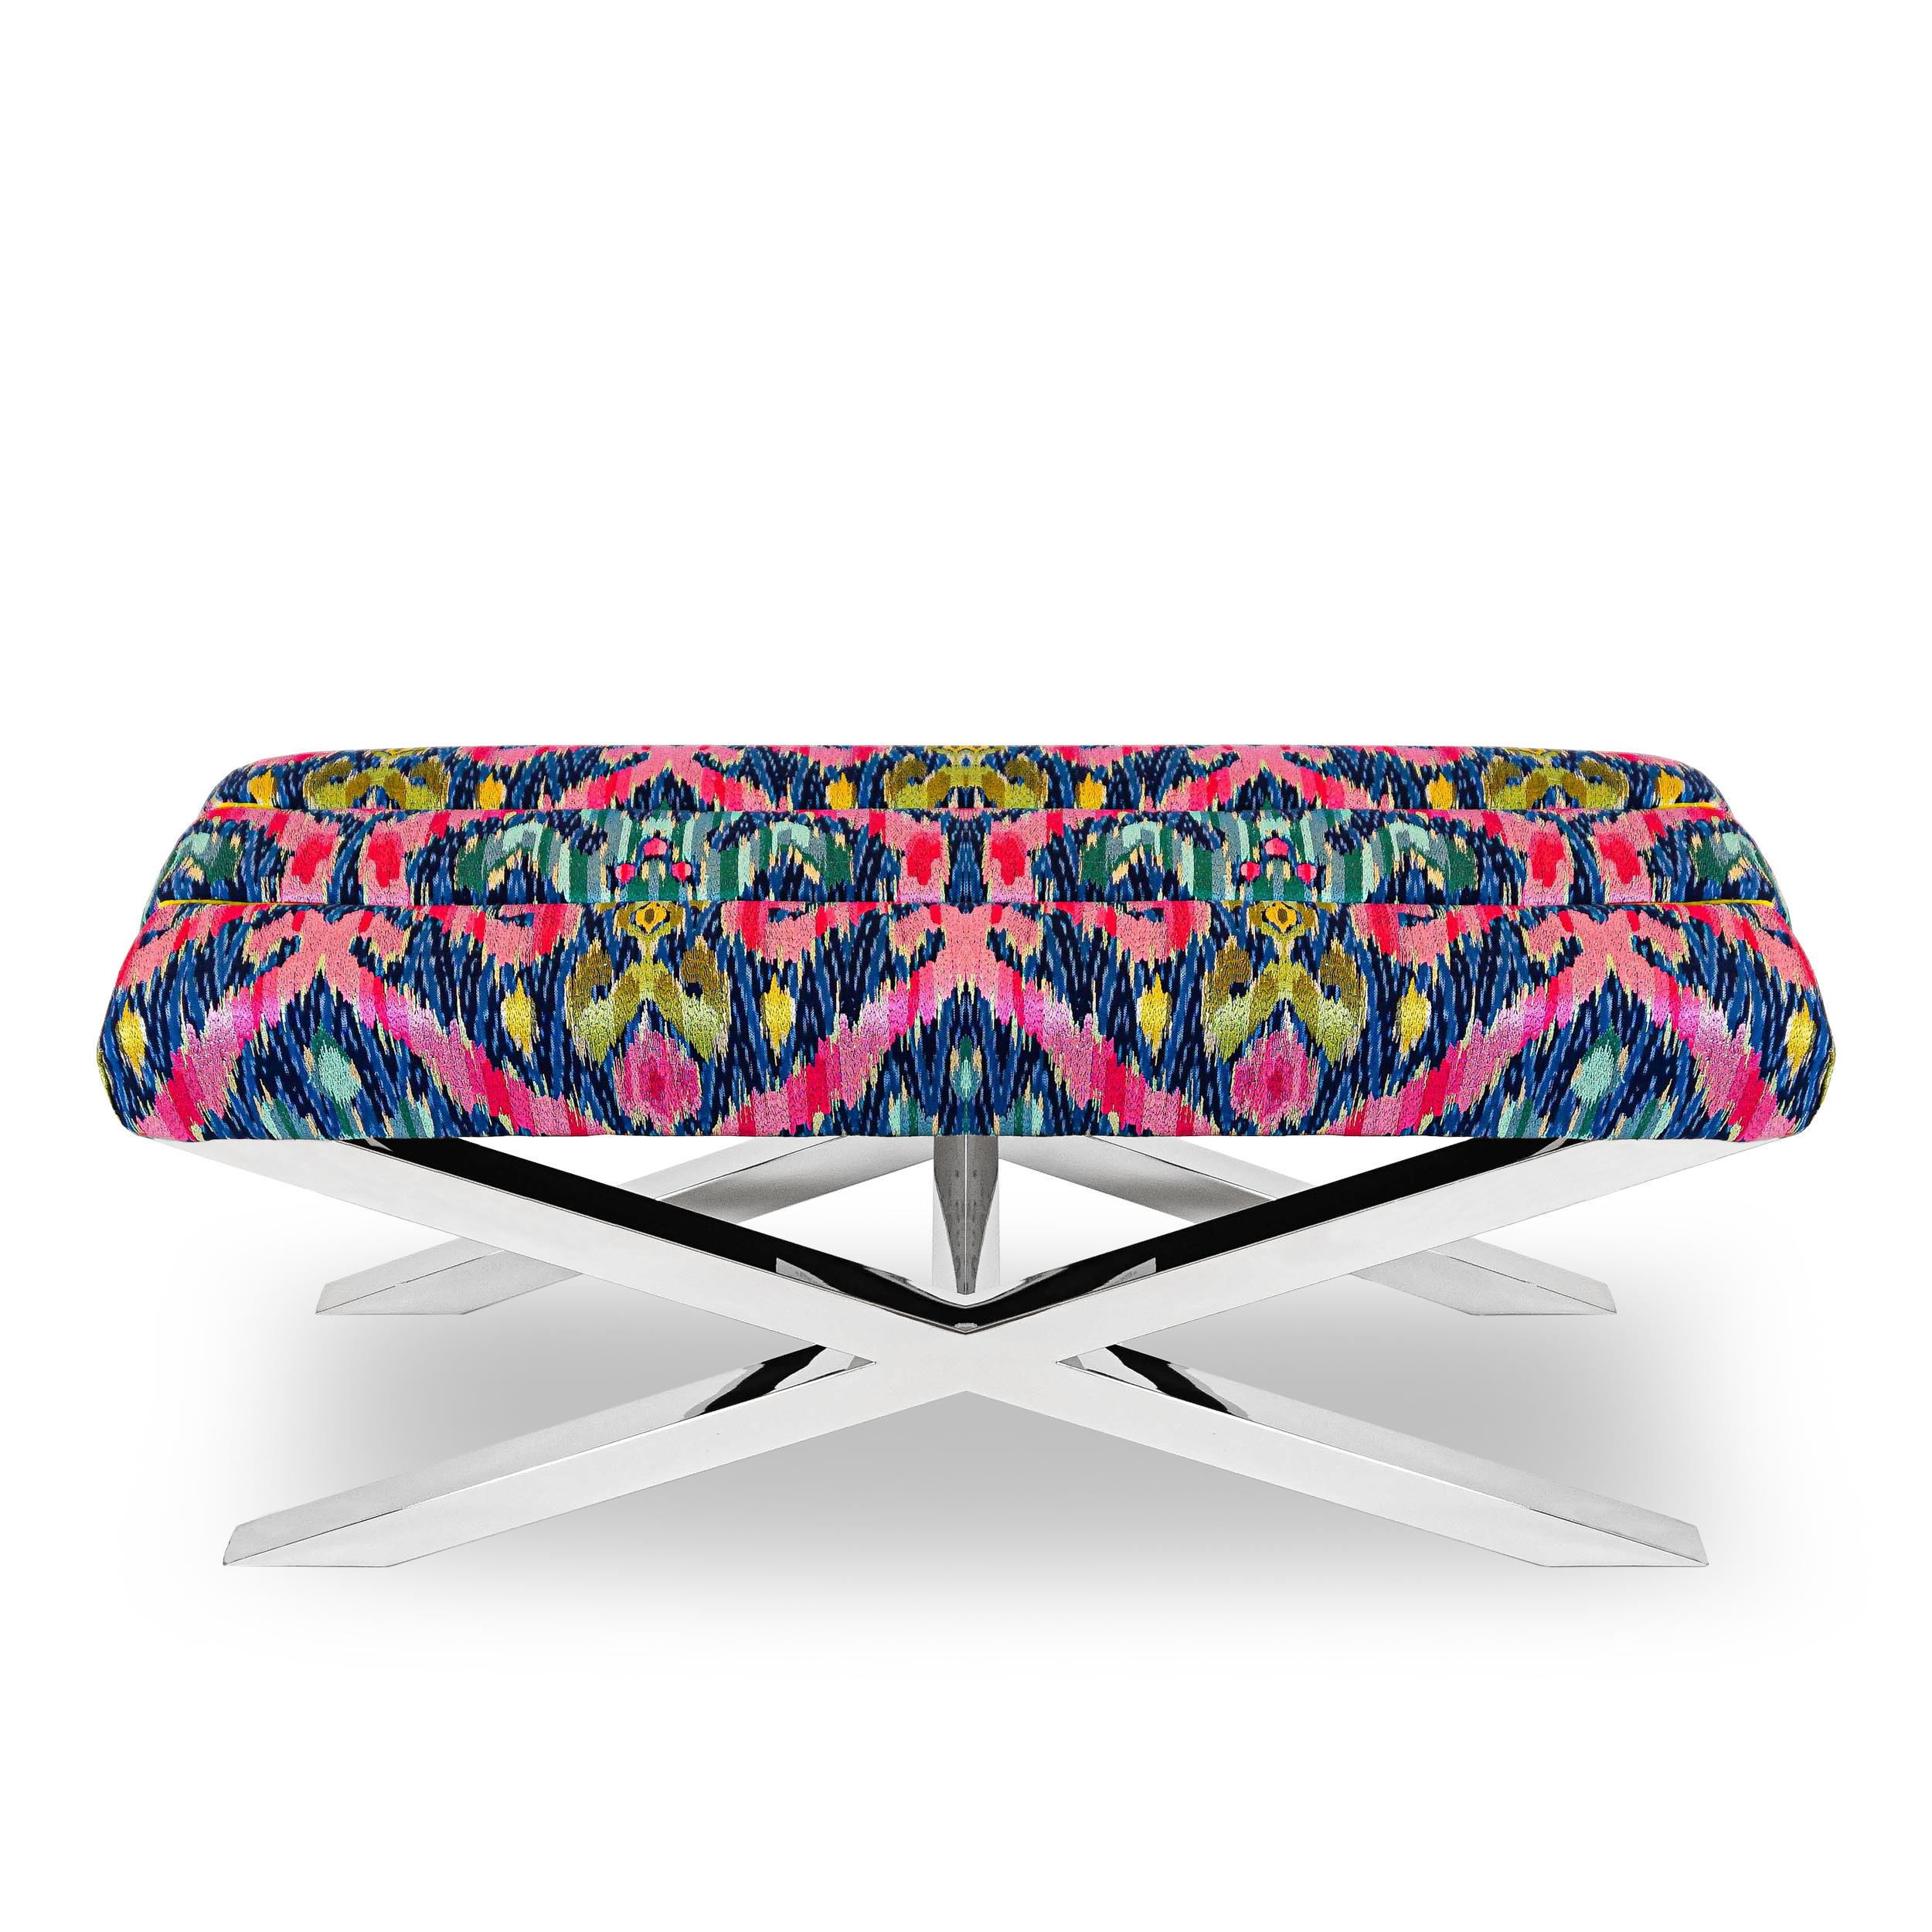 Modern multi-colored Ikat woven fabric bench with X-base legs in Polished Chrome finish. Channel Tufted Ikat Jacquard top with yellow accent fabric. Fabric can be customized. Custom size bases possible in different materials. 

Measurements: